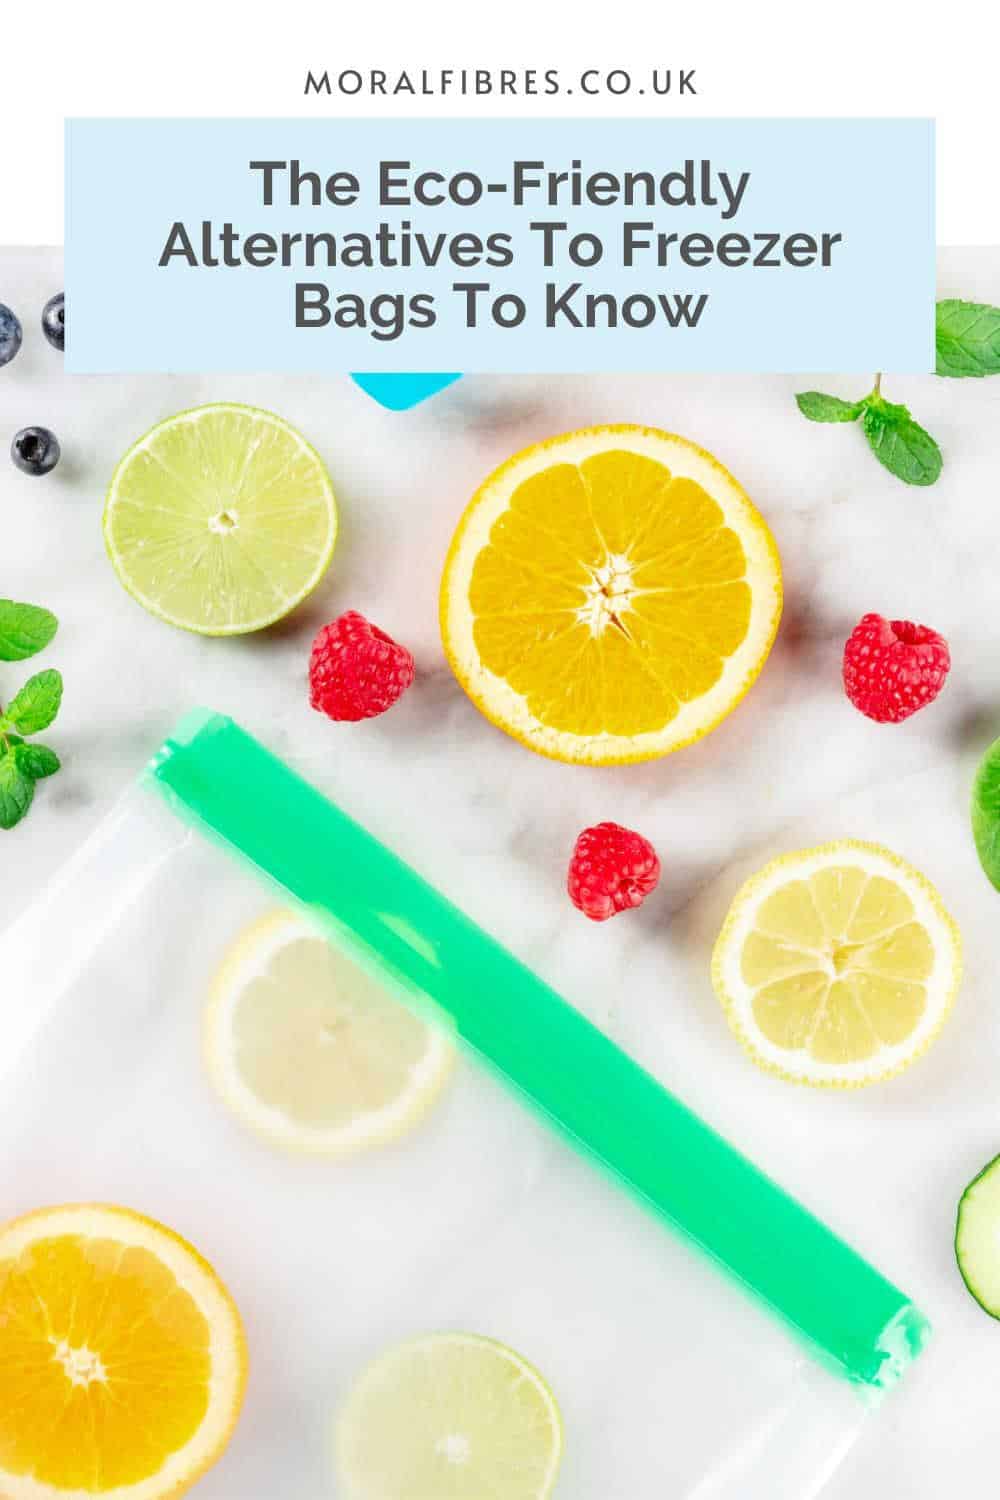 A reusable silicone freezer bag next to raspberries and slices of citrus, with a blue text box that reads the eco-friendly alternatives to freezer bags to know.